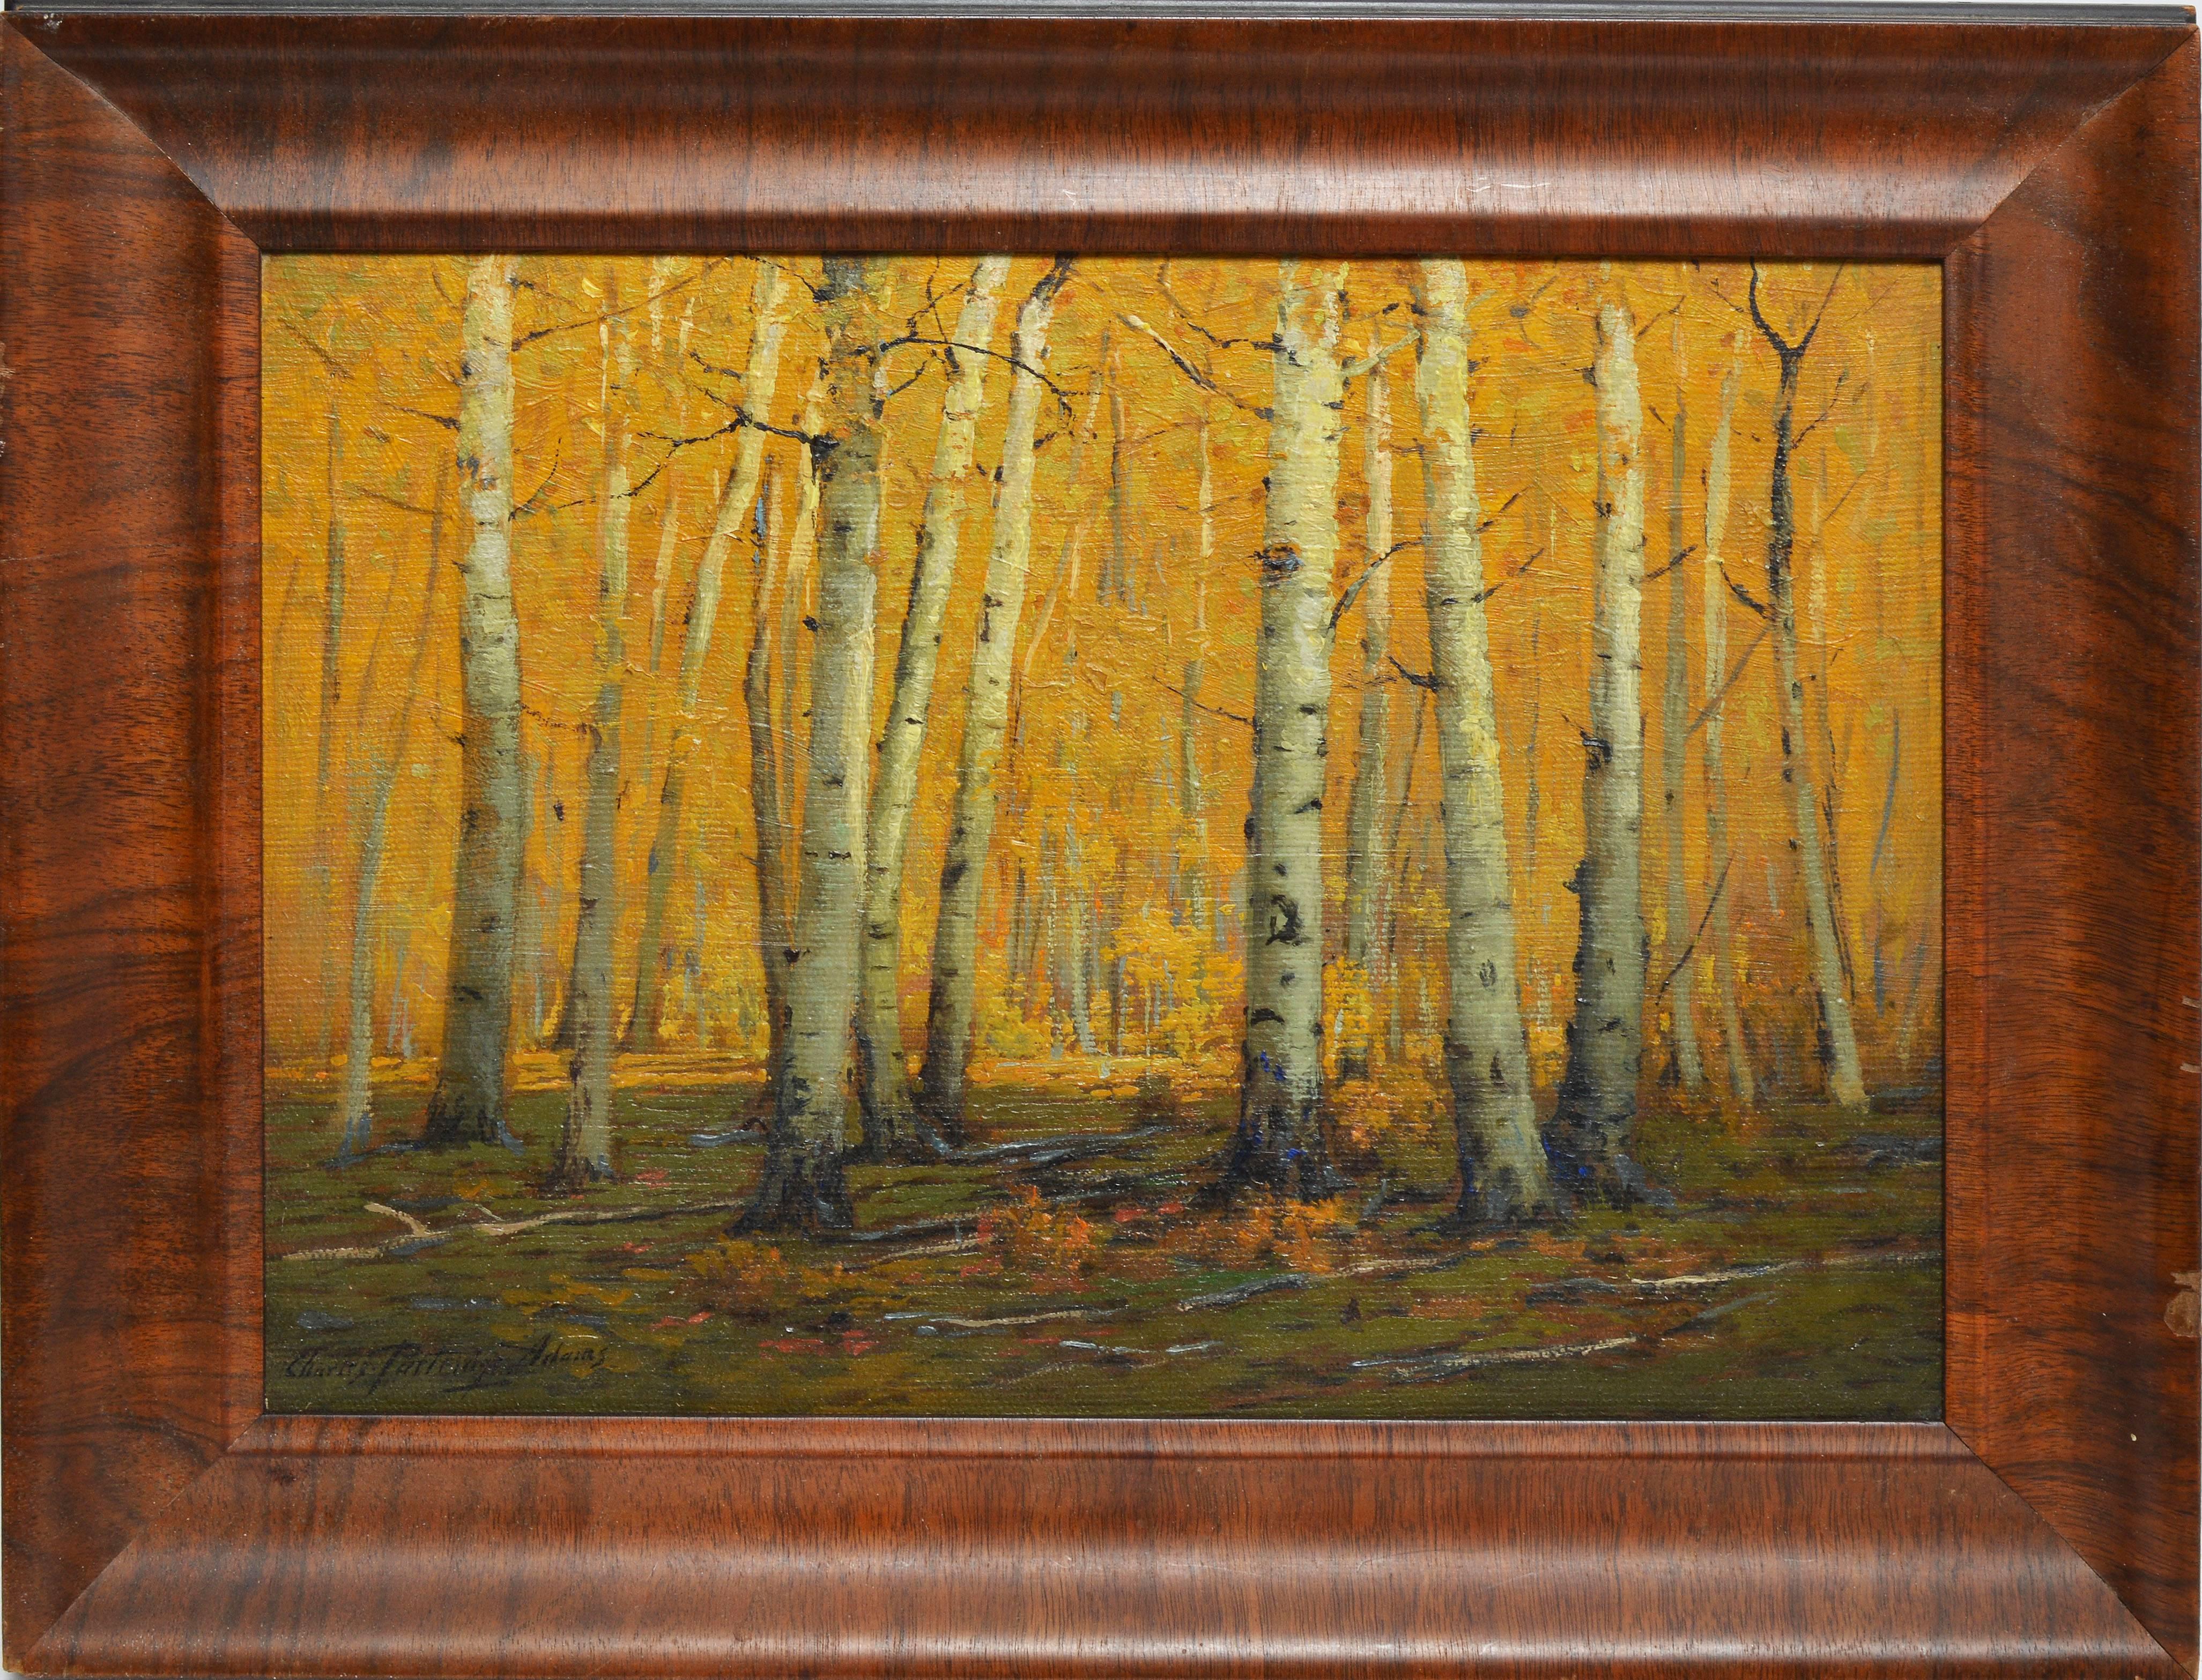 Realist landscape painting of Aspen Woods by Charles Partridge Adams (1858-1942).  Oil on canvas, circa 1910.  Signed lower left, "Charles Partridge Adams".  Displayed in a period wood frame.  Image size, 14"L x 10"H, overall 19"L x 15"H.